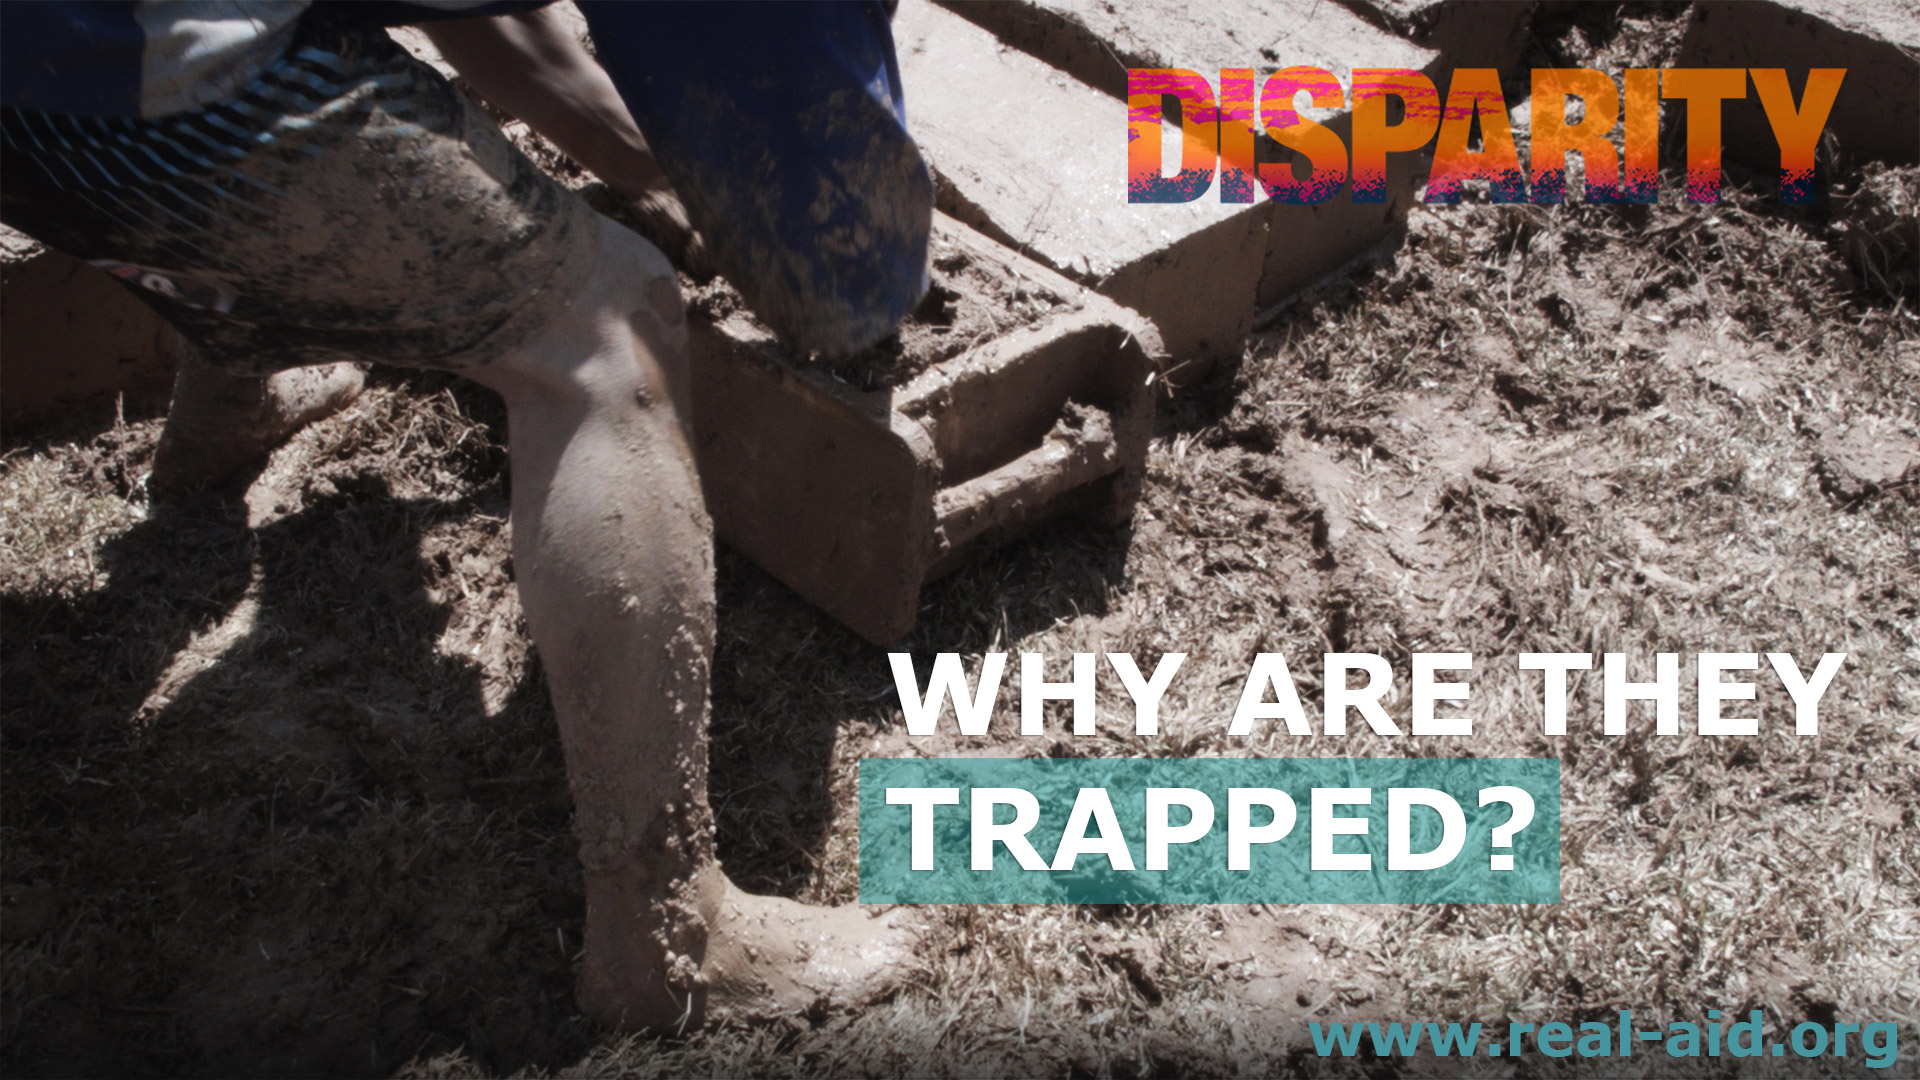 Disparity film poster, why are they trapped quote, person making mud bricks